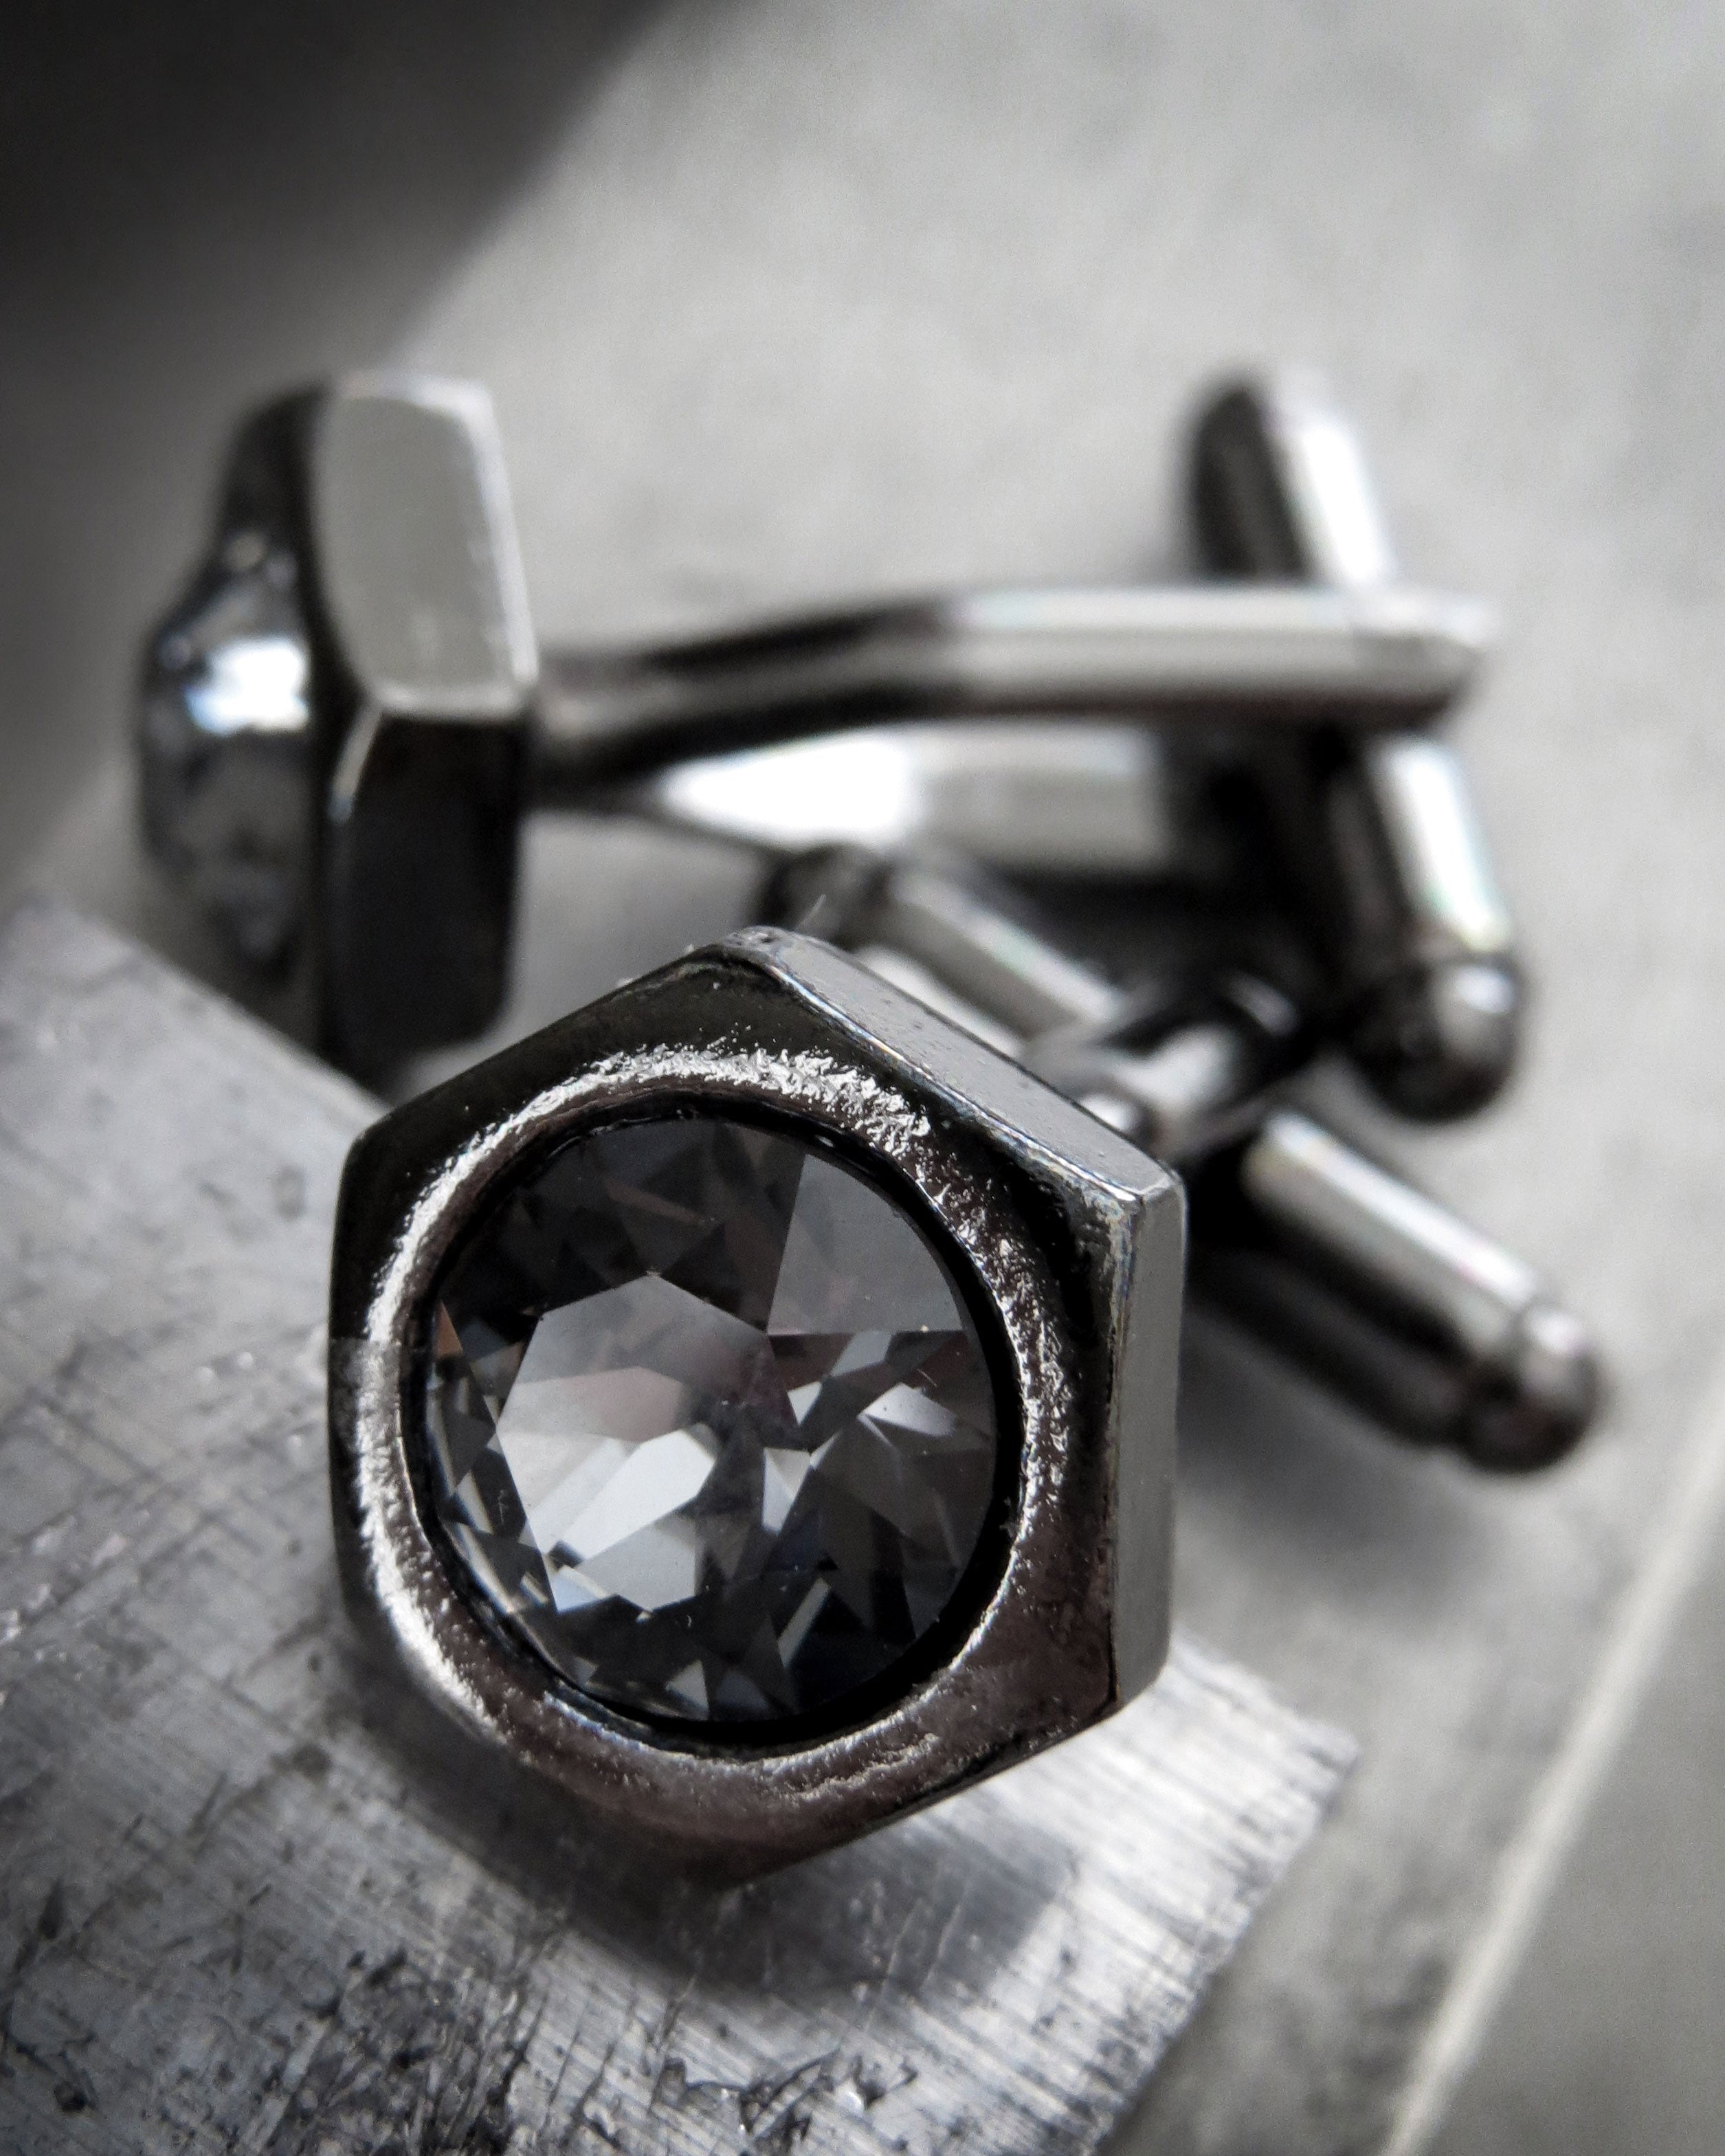 Black Hex Nut Cuff Links with Black Crystal